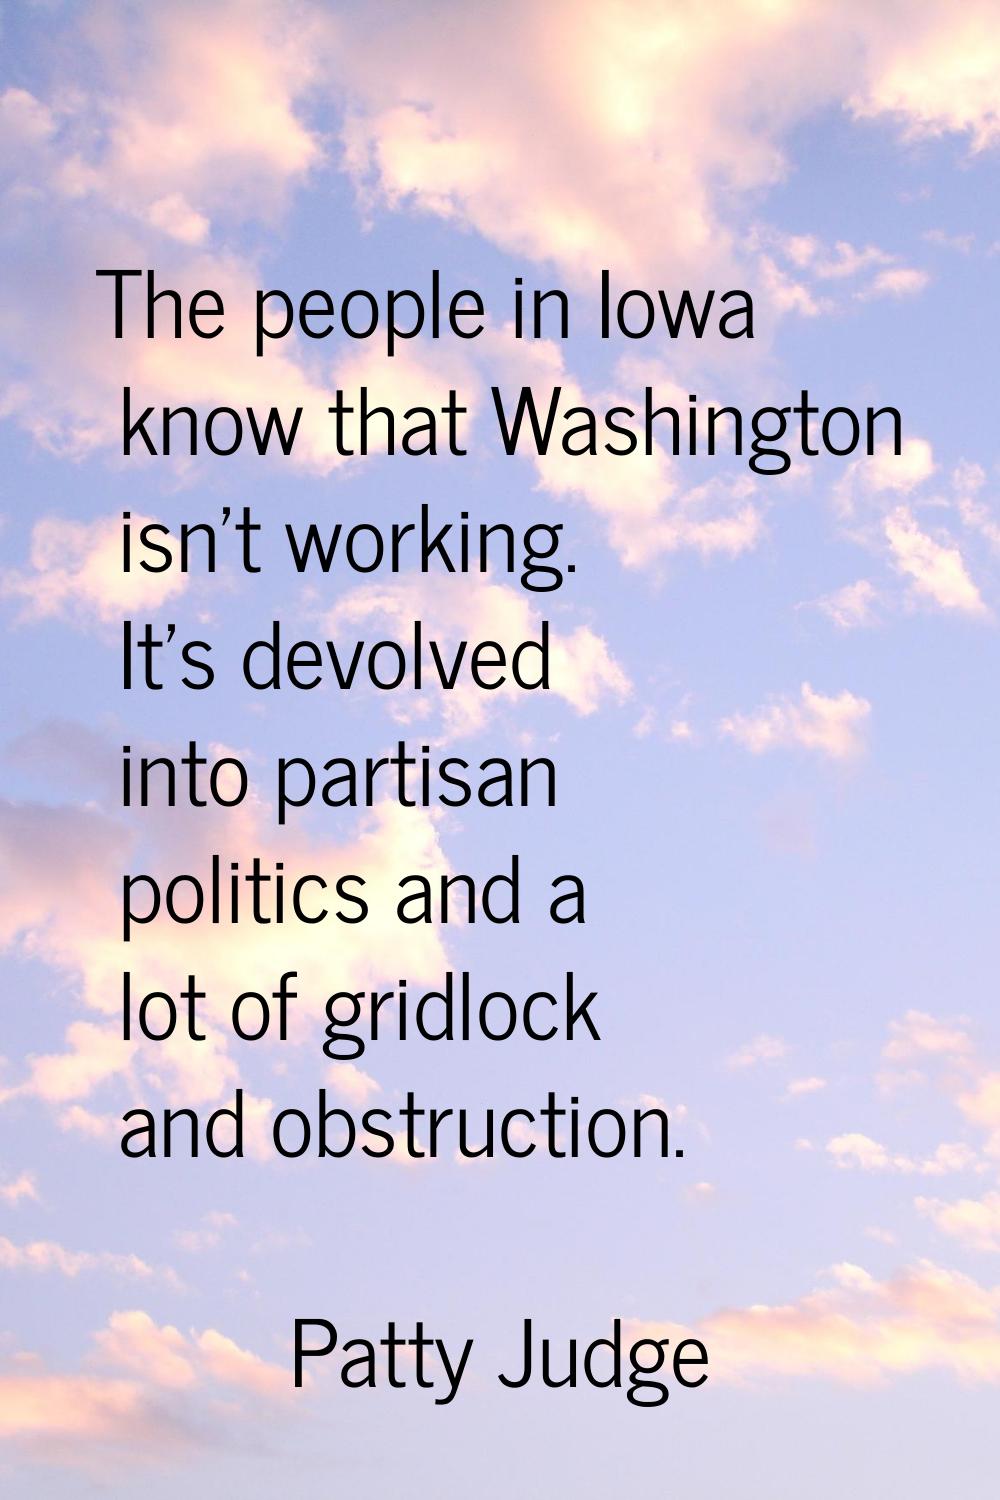 The people in Iowa know that Washington isn't working. It's devolved into partisan politics and a l